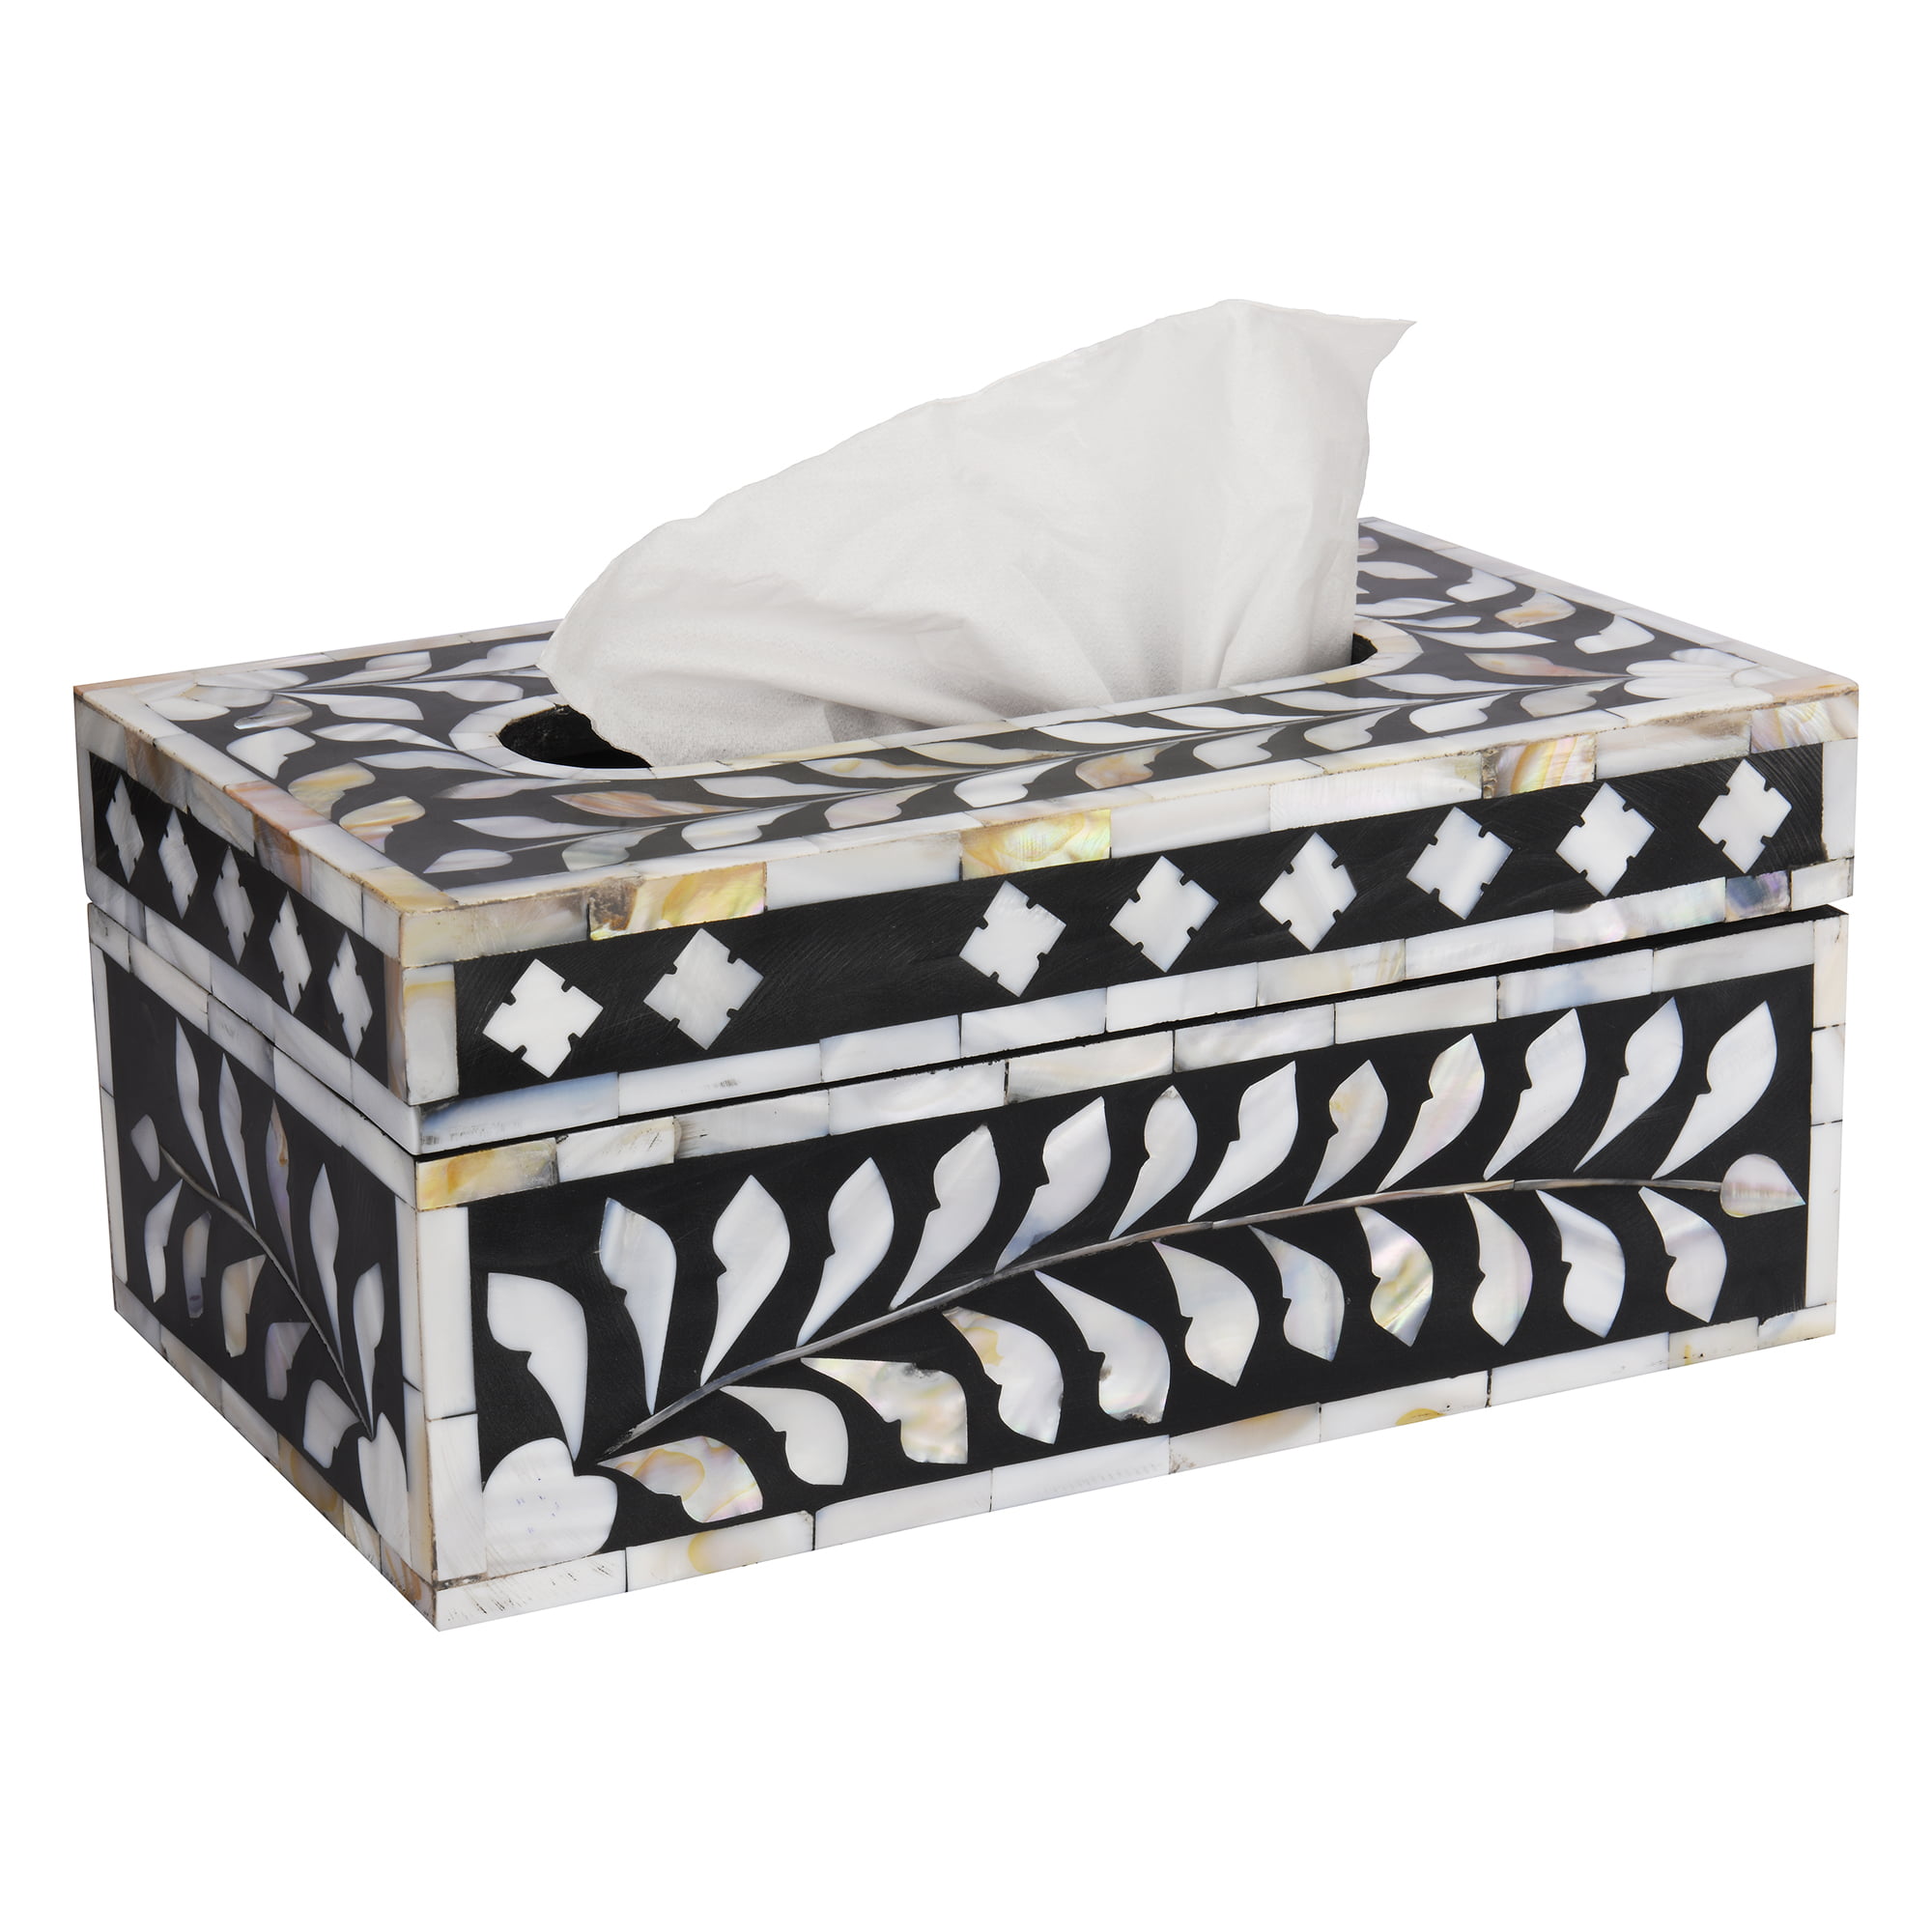 Mother of Pearl Inlay Tissue Box Cover in Ash Gray 6/"x6/"x6/"